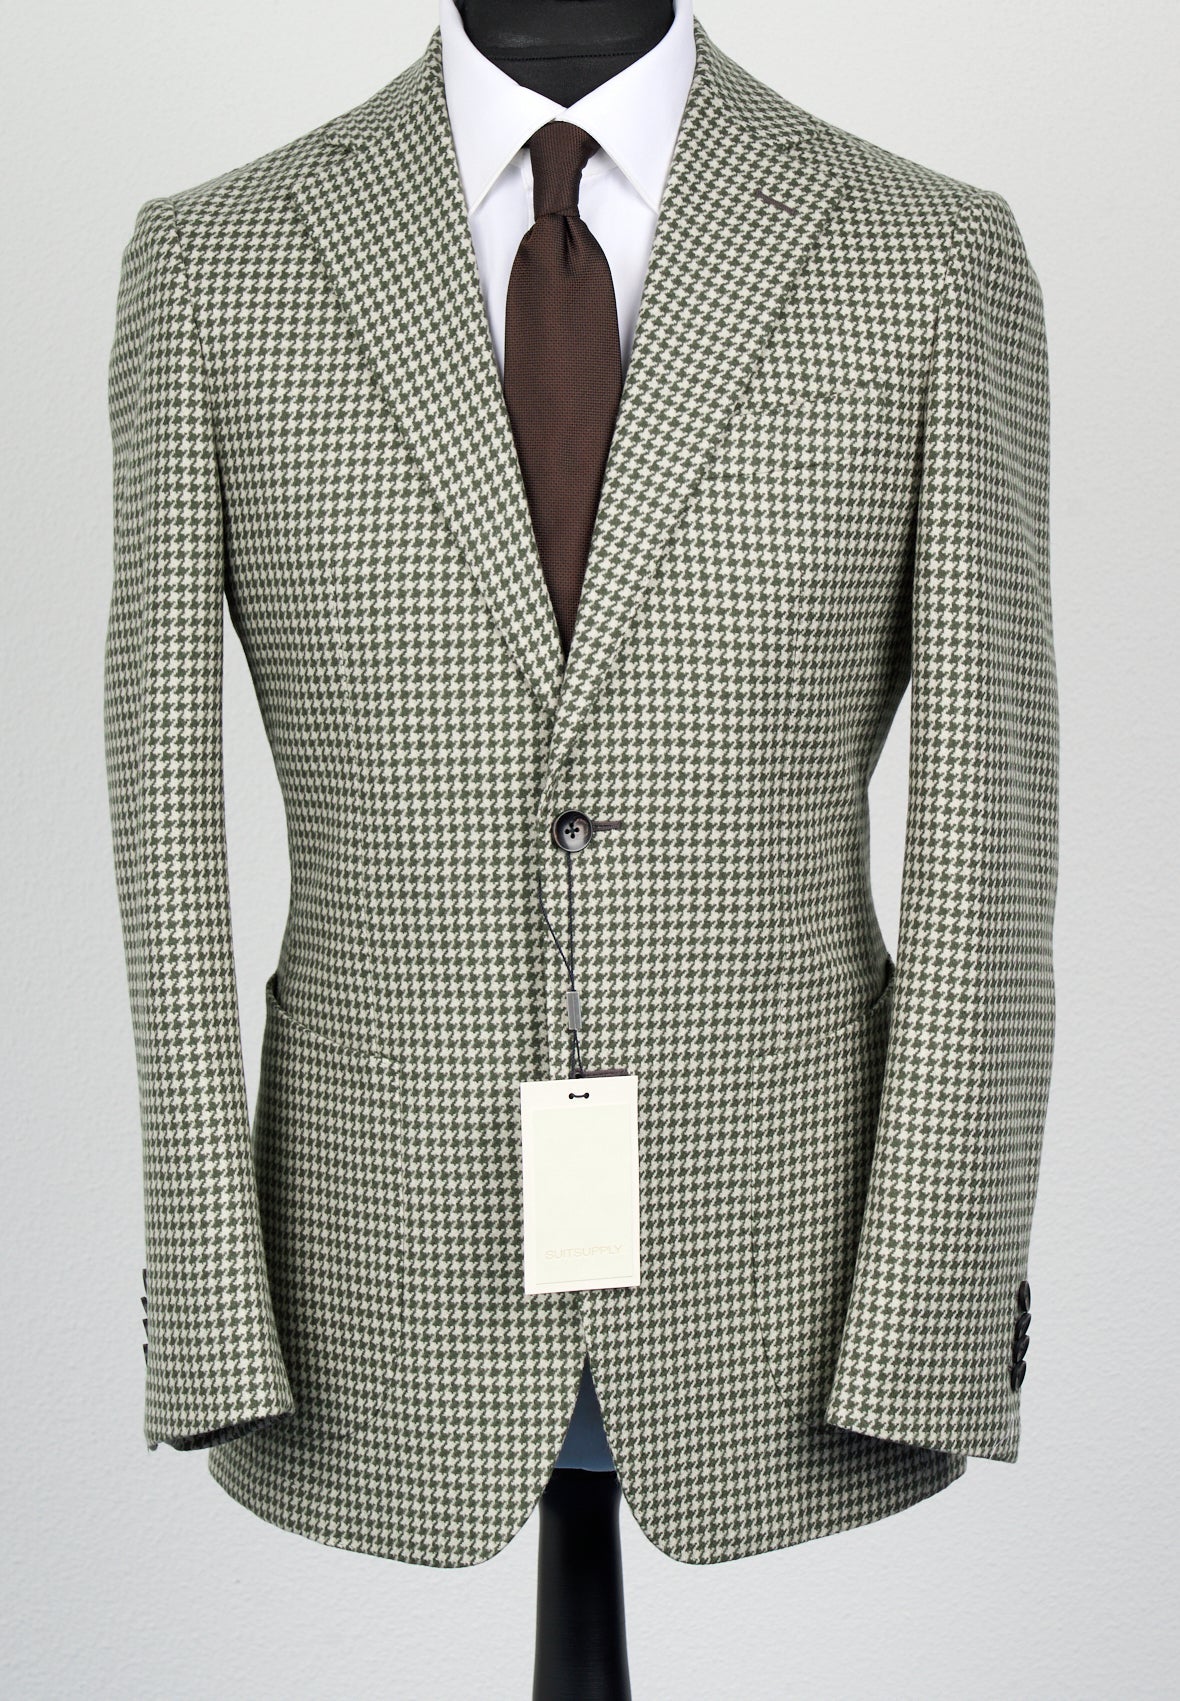 New Suitsupply Mid Green Houndstooth Wool and Cashmere Suit - Size 46R